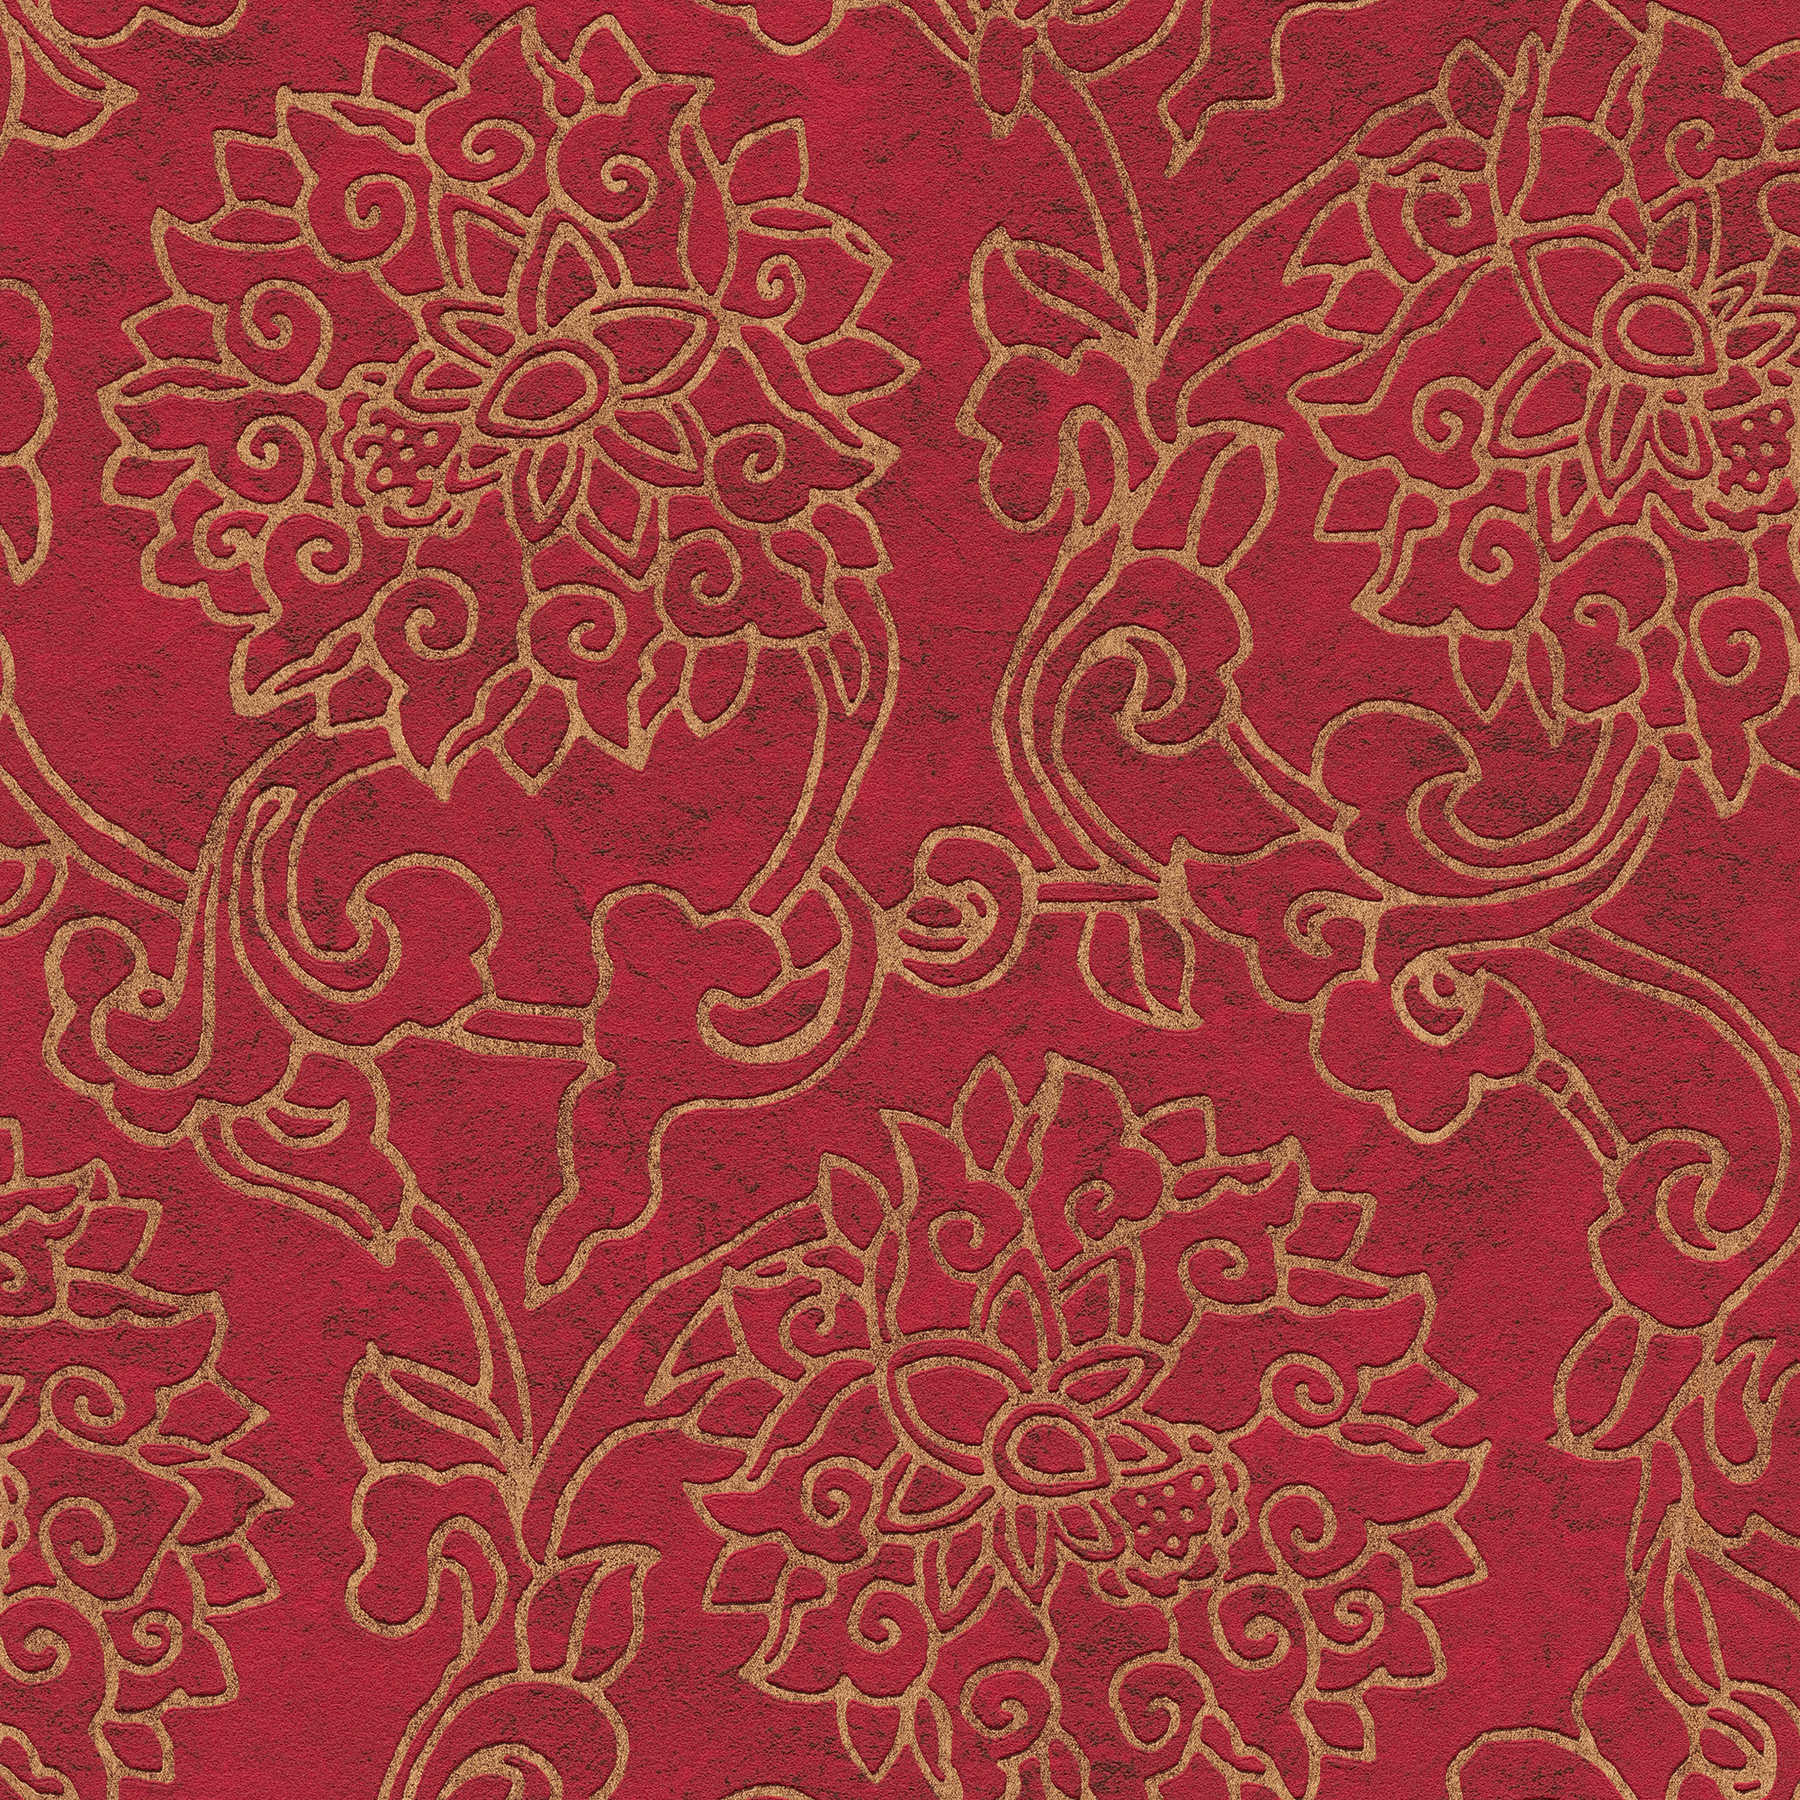         Asian style floral ornament wallpaper with gold accents - Red, Gold
    